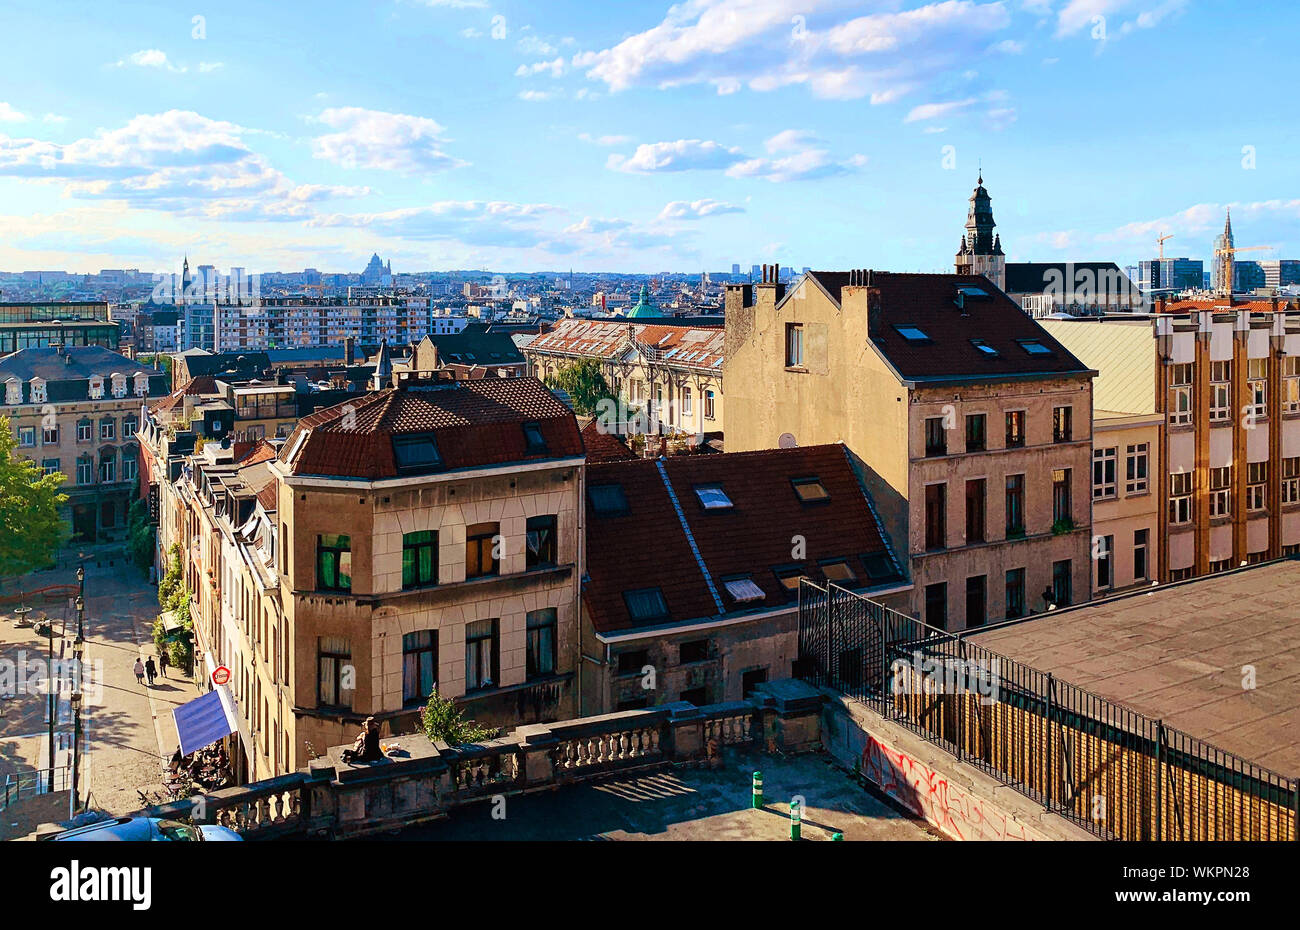 Brussels / Belgium - July 8, 2019: Panoramic view of Brussels city from the square next to Palace de Justice in Marolles. Stock Photo